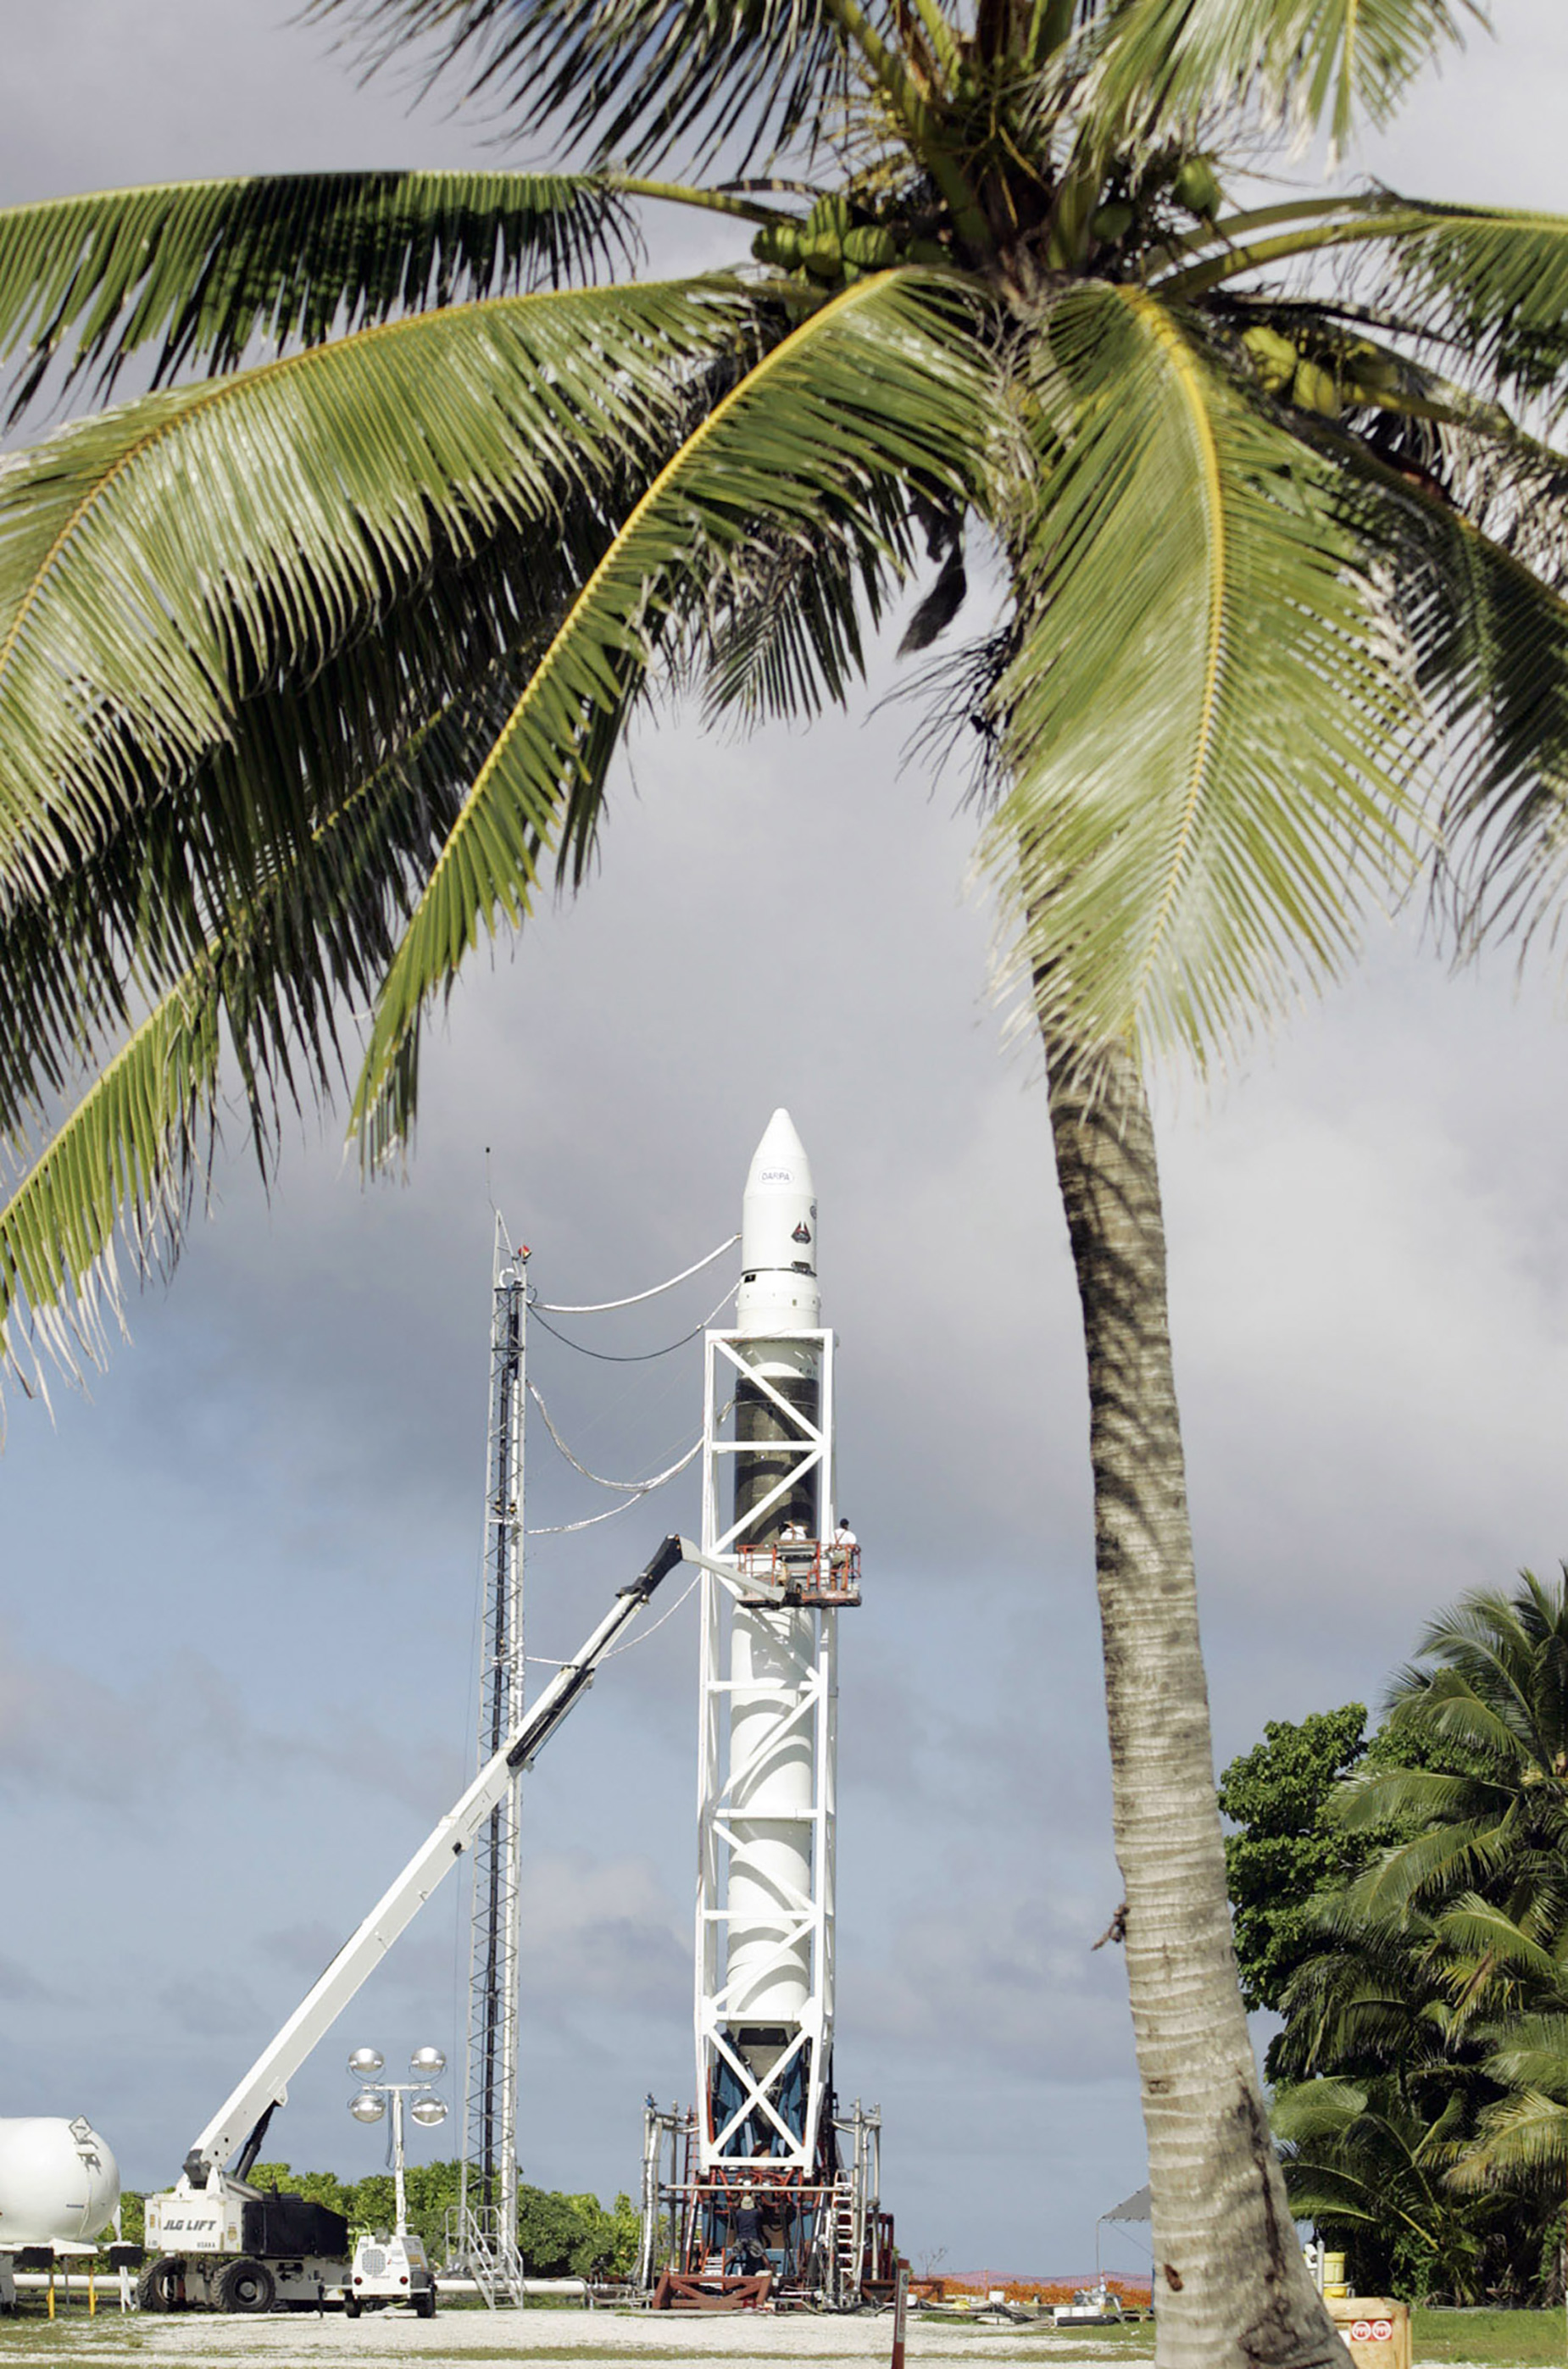 SpaceX's Falcon 1 at the Ronald Reagan Ballistic Missile Test Site on Omelek Island, in November 2005. 